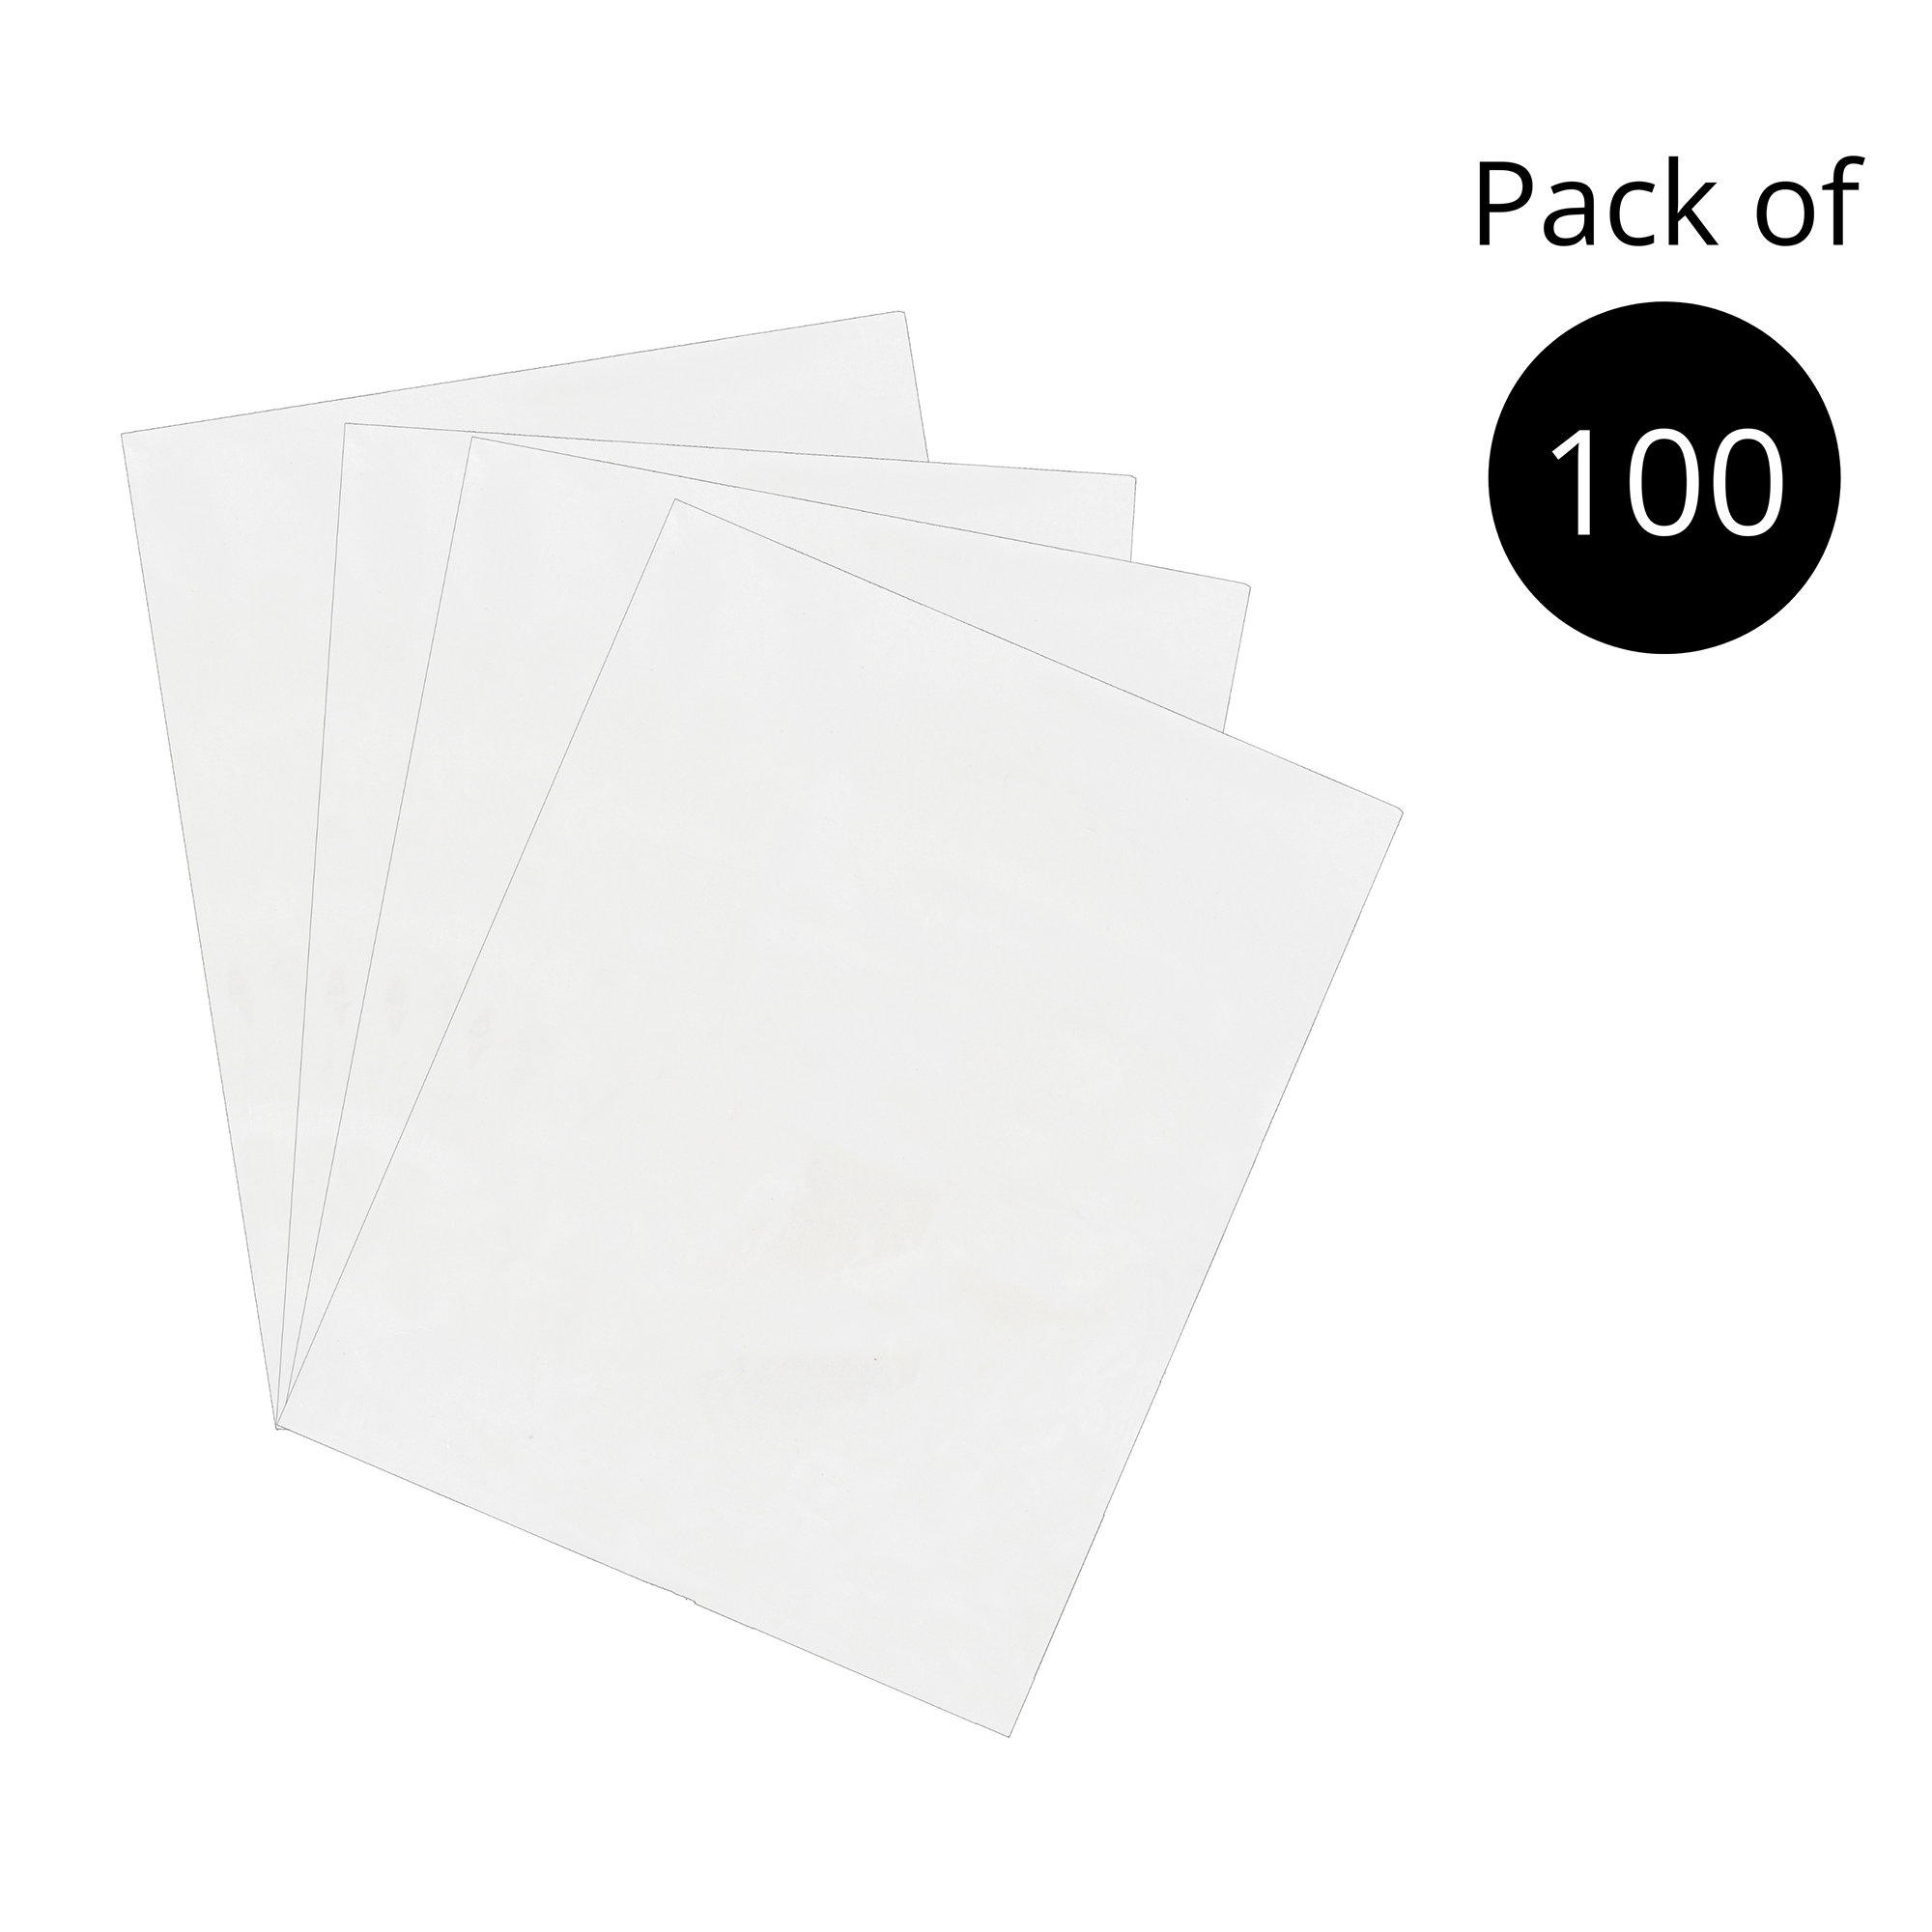 InfinitePack 100 CT 16x20 inches 1 Mil Clear Plastic Flat Open Poly Bags Great for Food, Storage, Packaging, and More - Infinite Pack